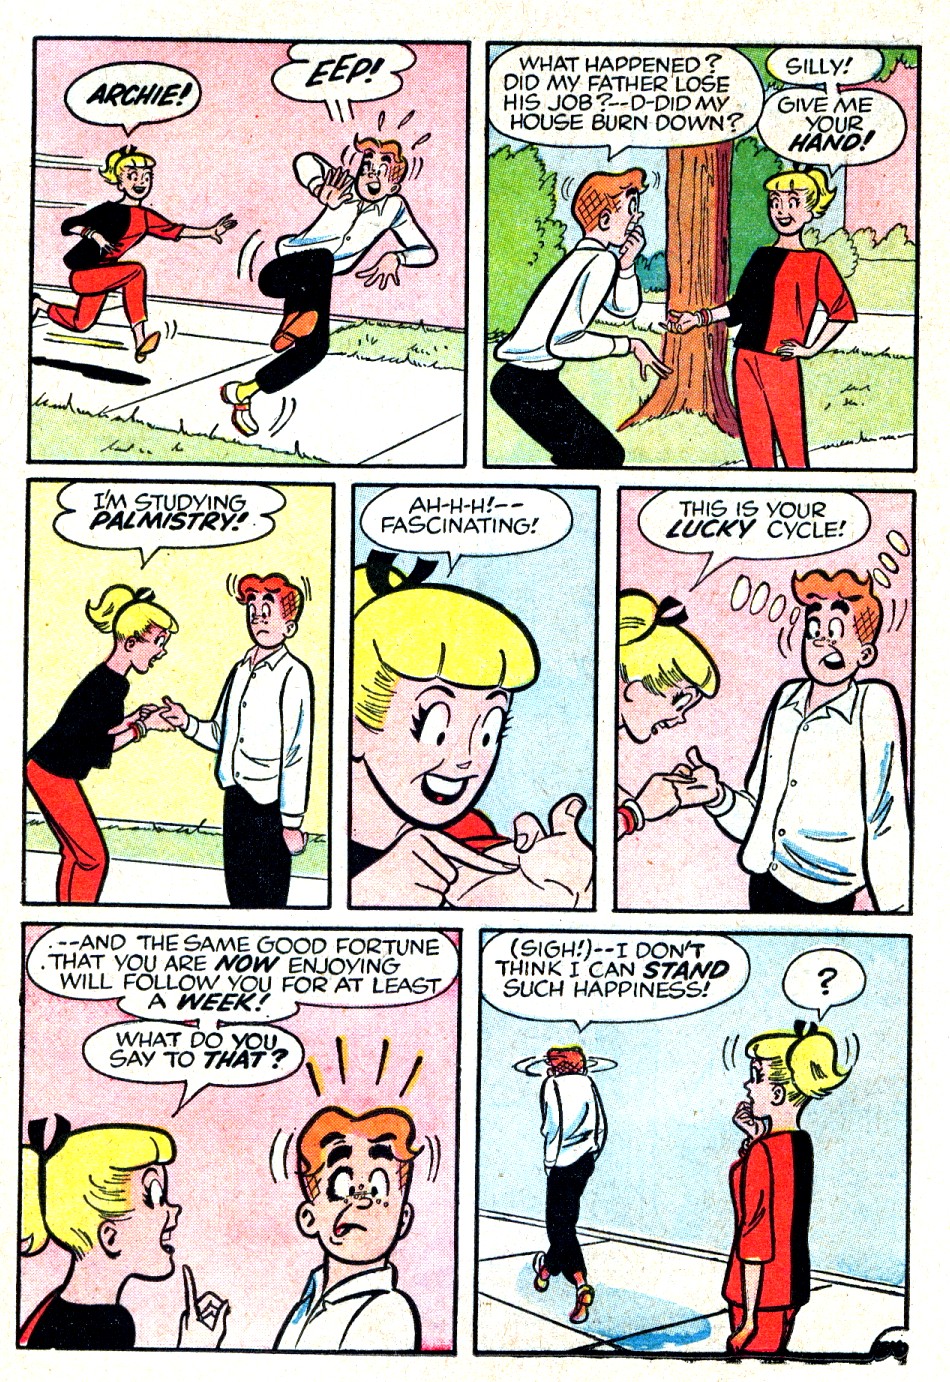 Archie (1960) 123 Page 18